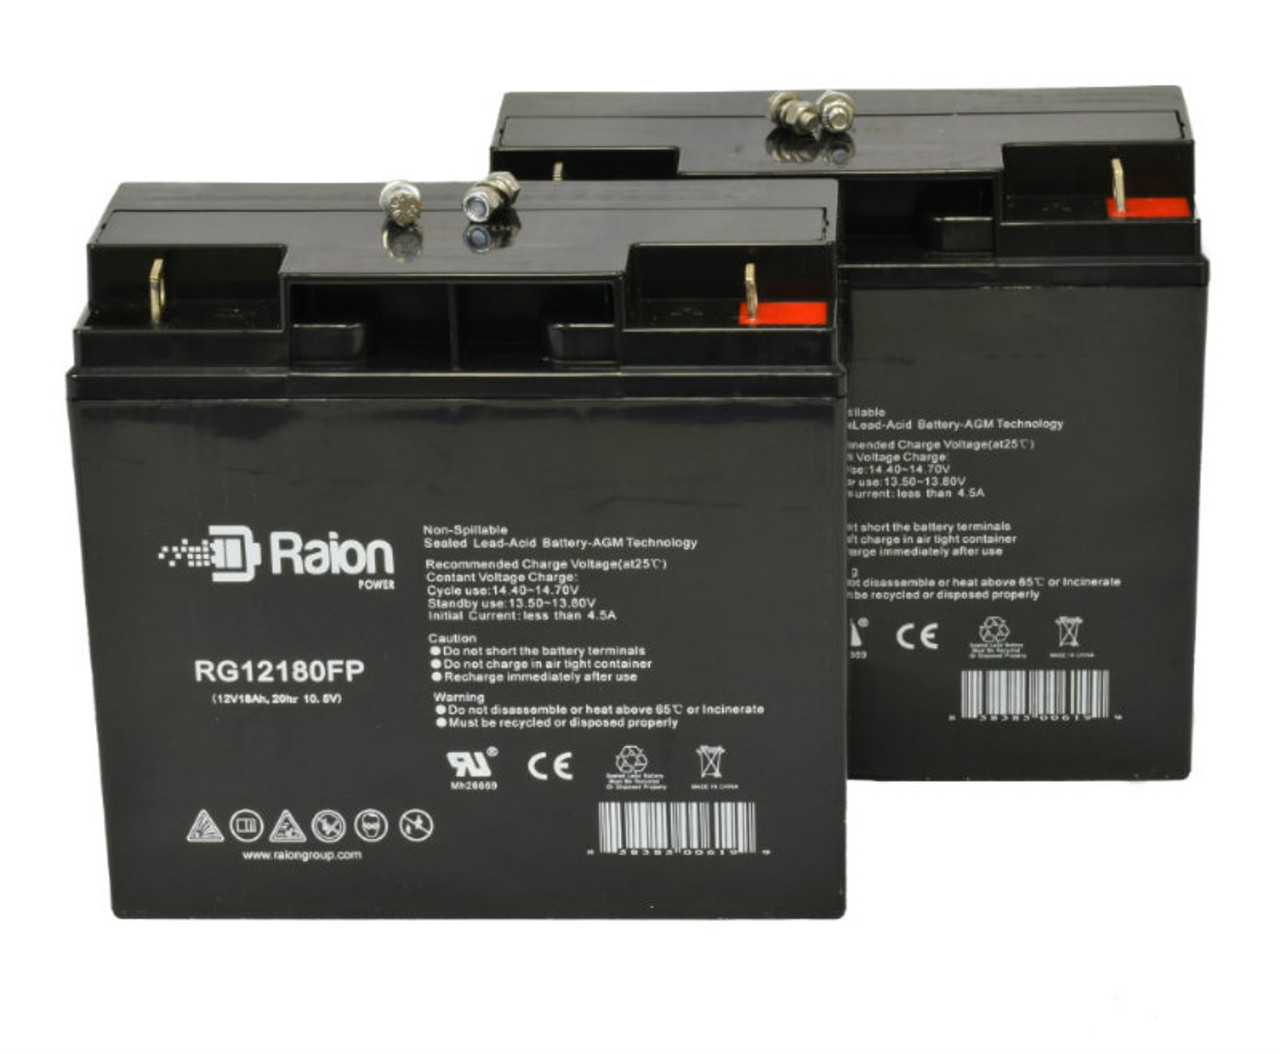 Raion Power Replacement RG12180FP 12V 18Ah Emergency Light Battery for Big Beam 2IL12S15 - 2 Pack